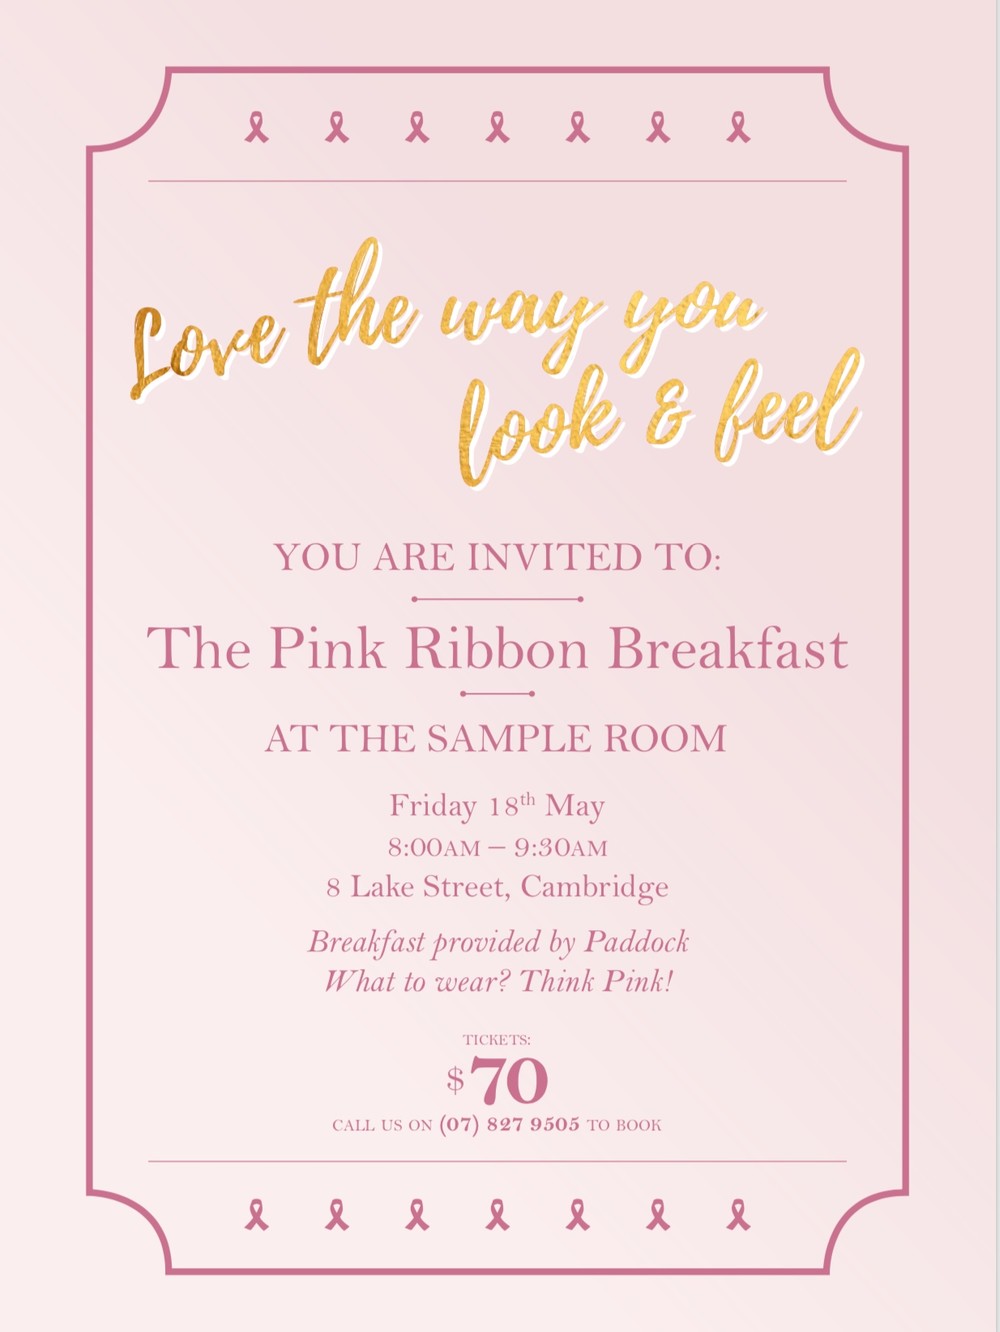 The Sample Room and Paddock’s Pink Ribbon Breakfast